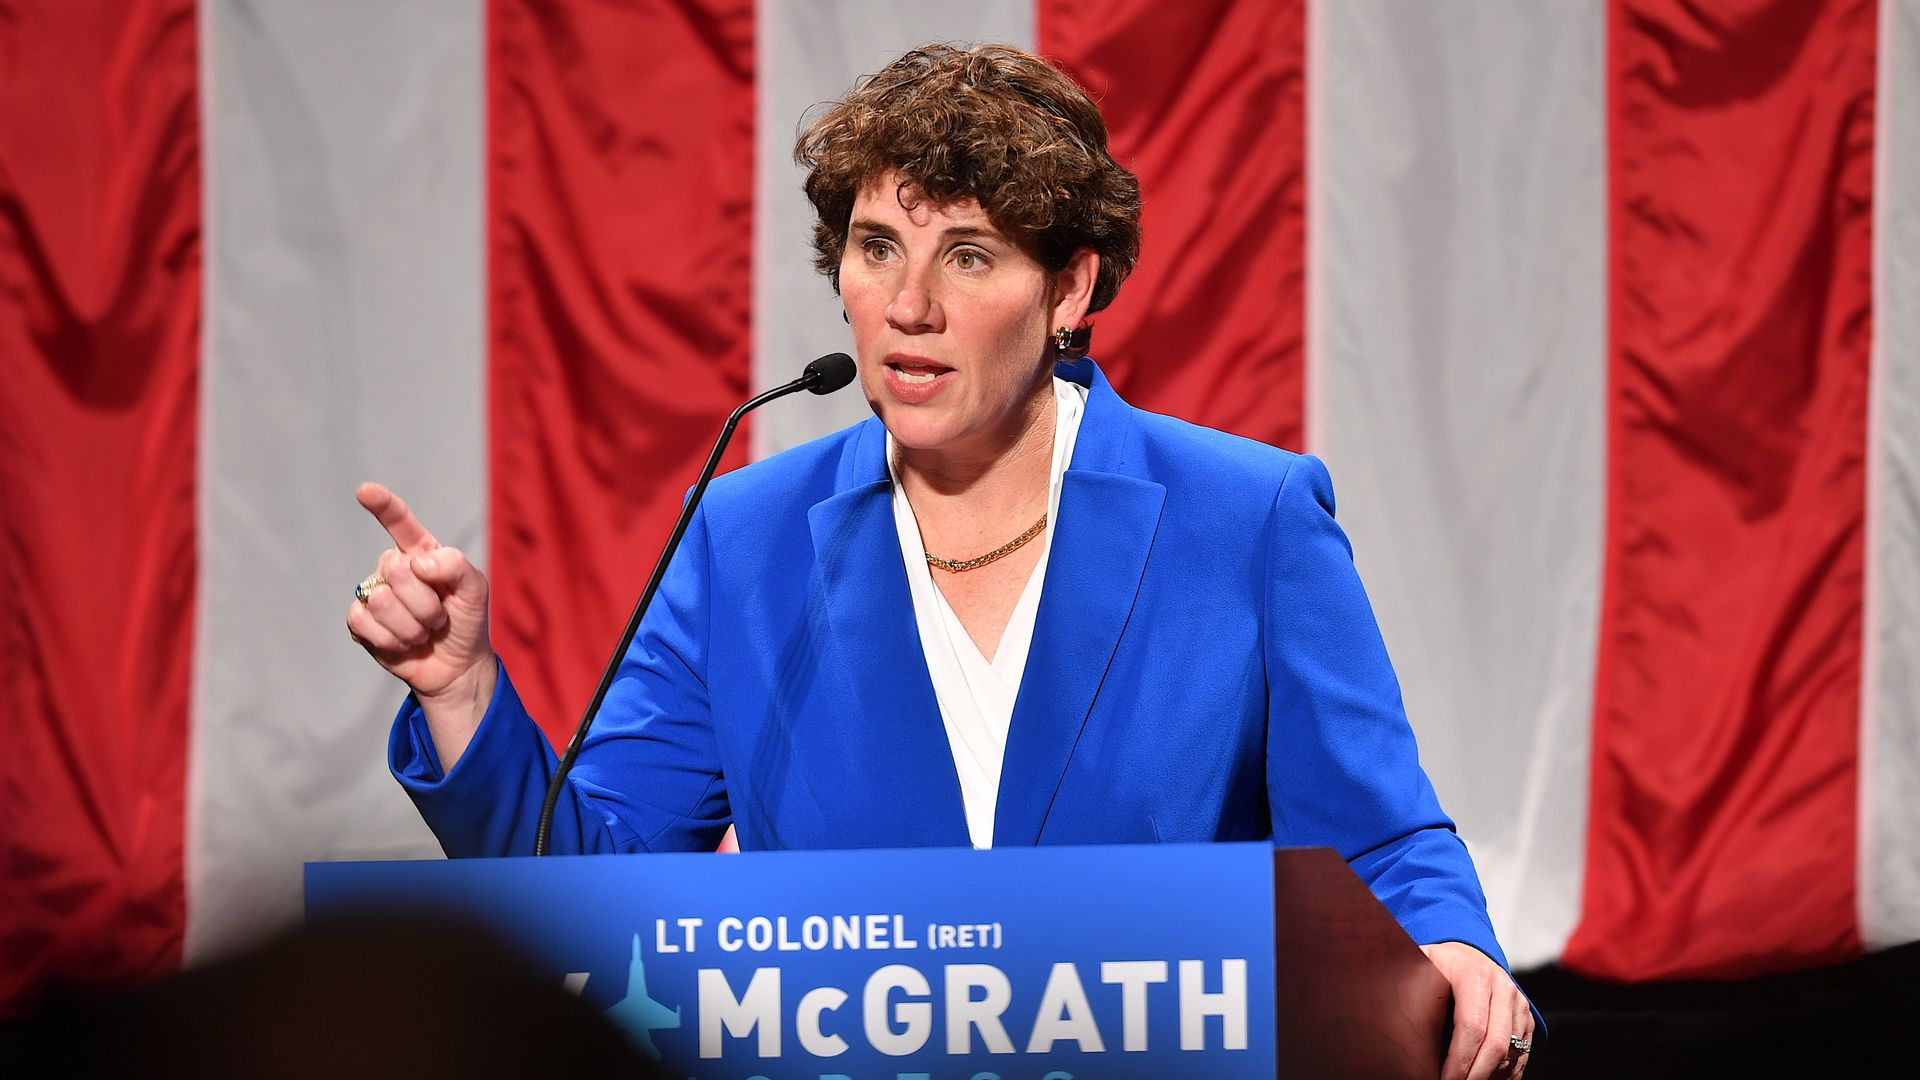 Amy McGrath address supporters after her loss during her Election Night Event at the EKU Center for the Arts on November 6, 2018.